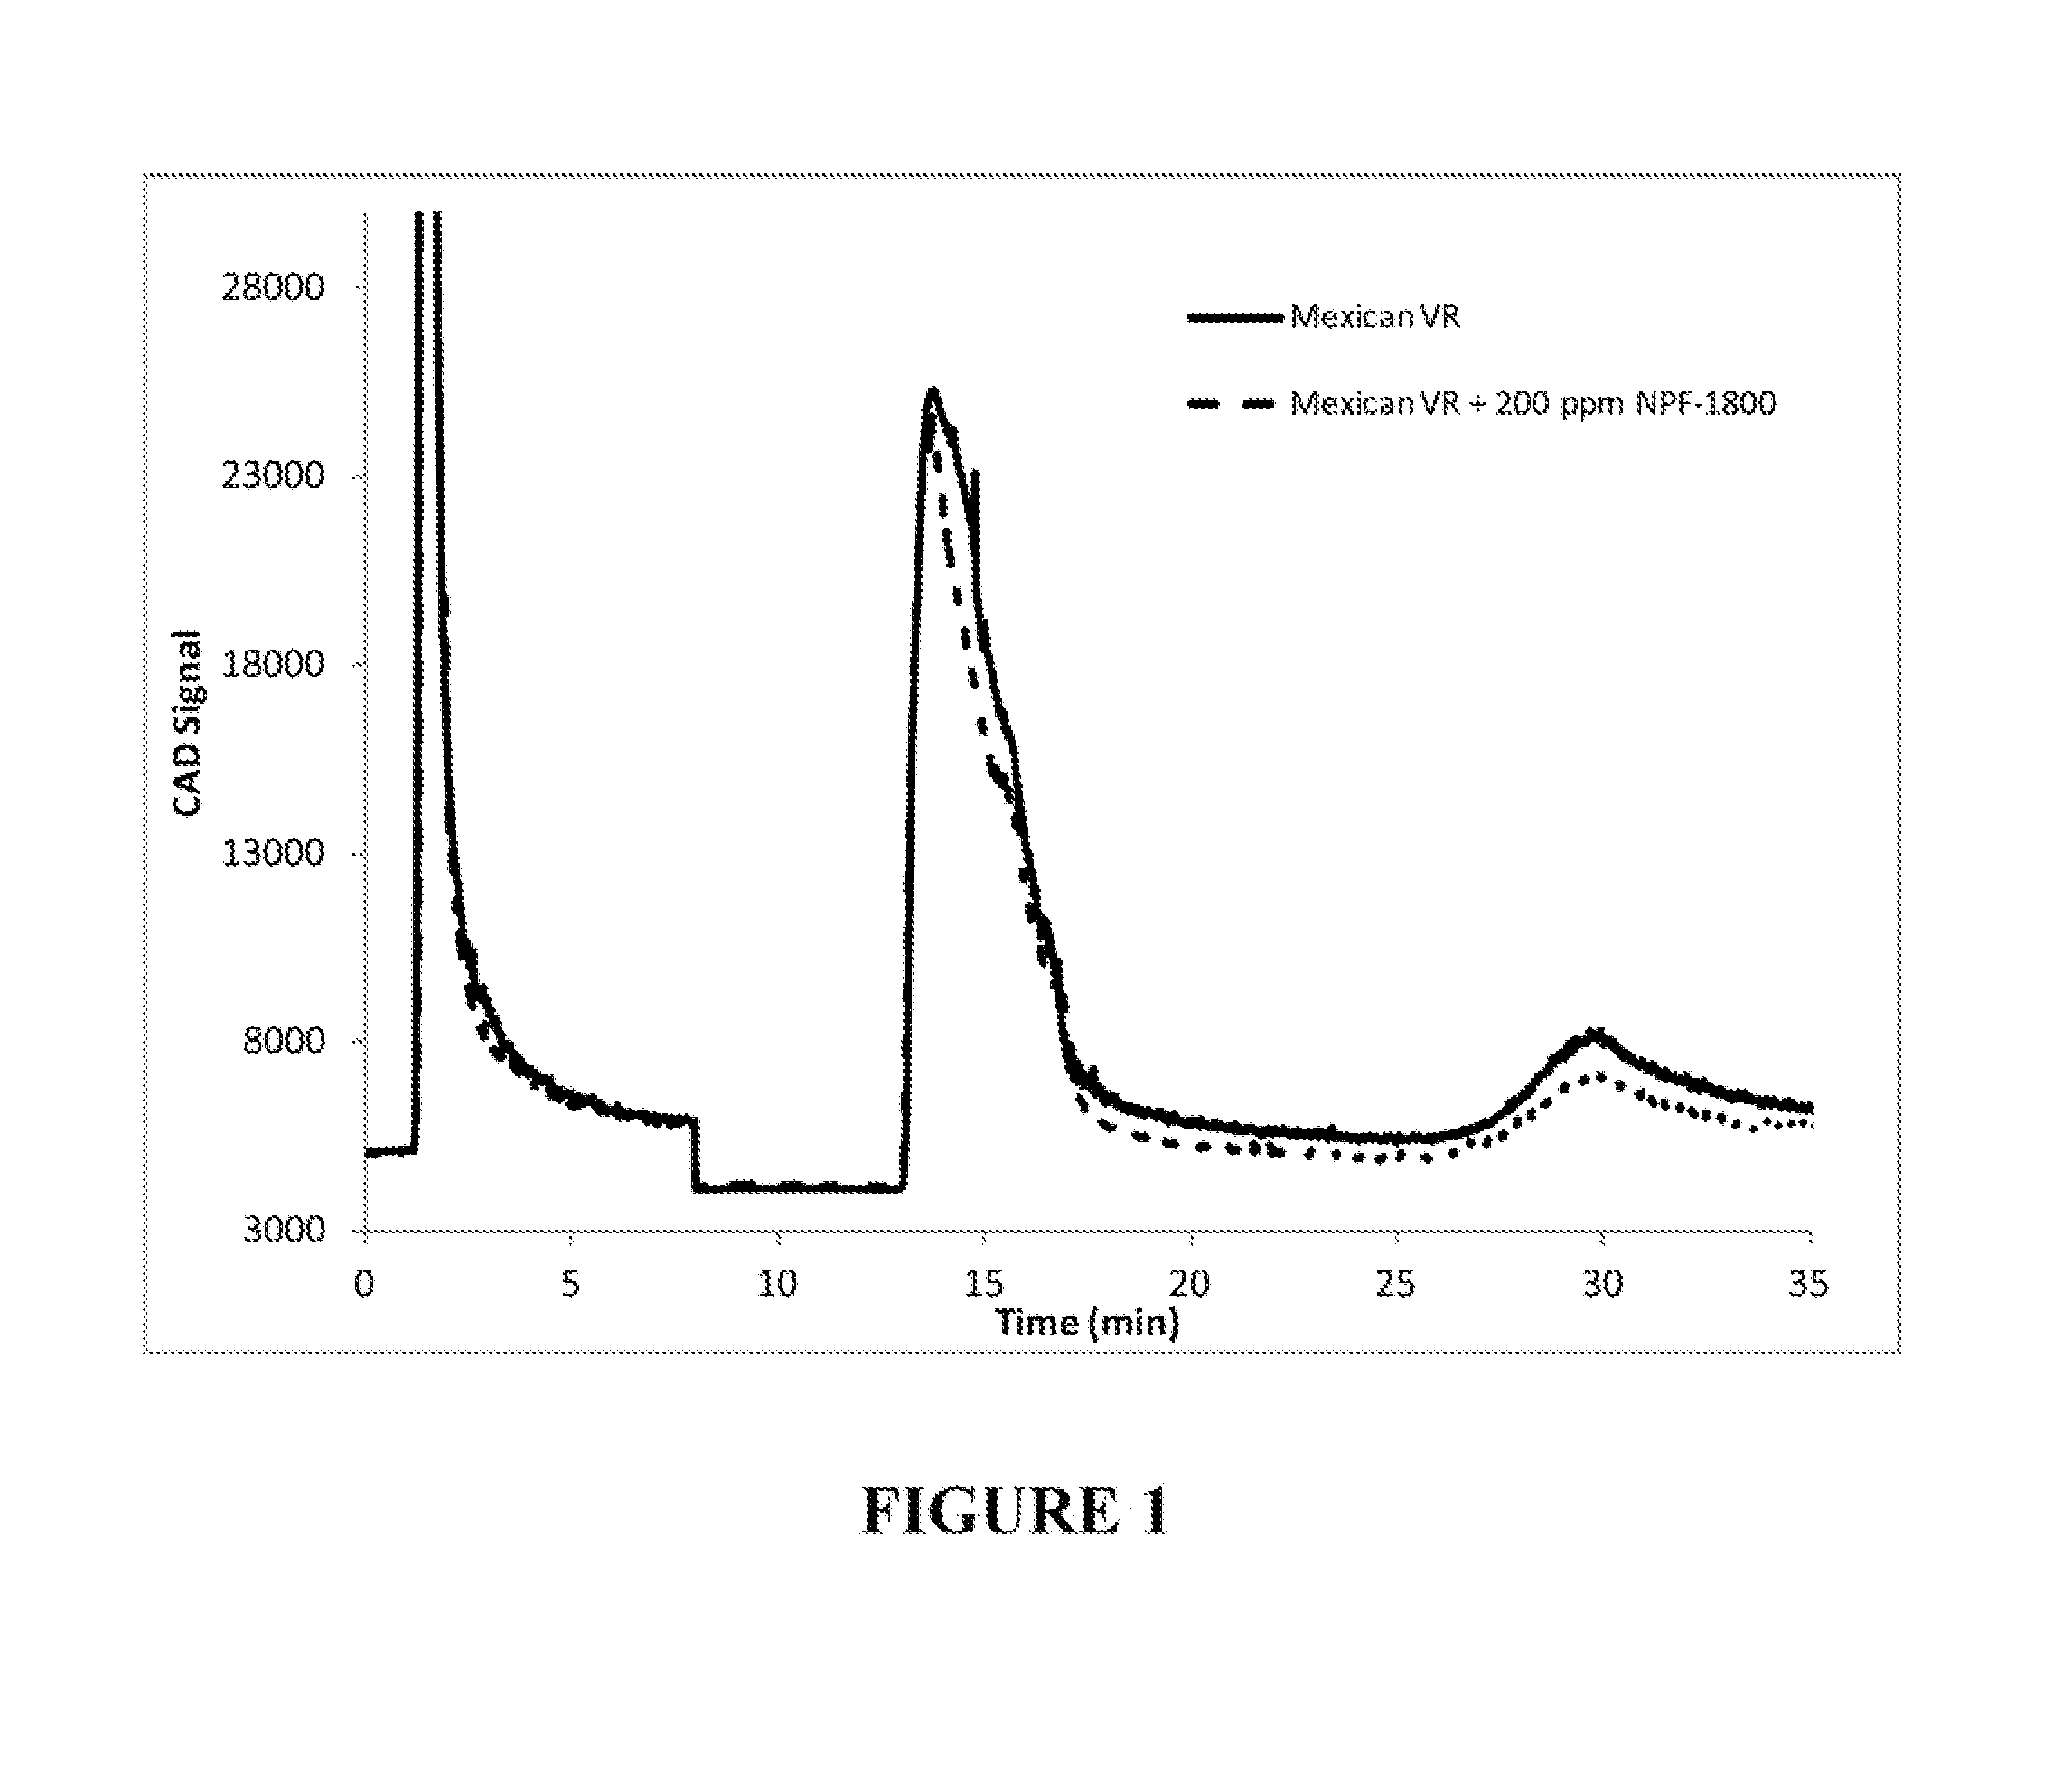 Method for determining the effectiveness of asphaltene dispersant additives for inhibiting or preventing asphaltene precipitation in a hydrocarbon-containing material subjected to elevated temperature and pressure conditions